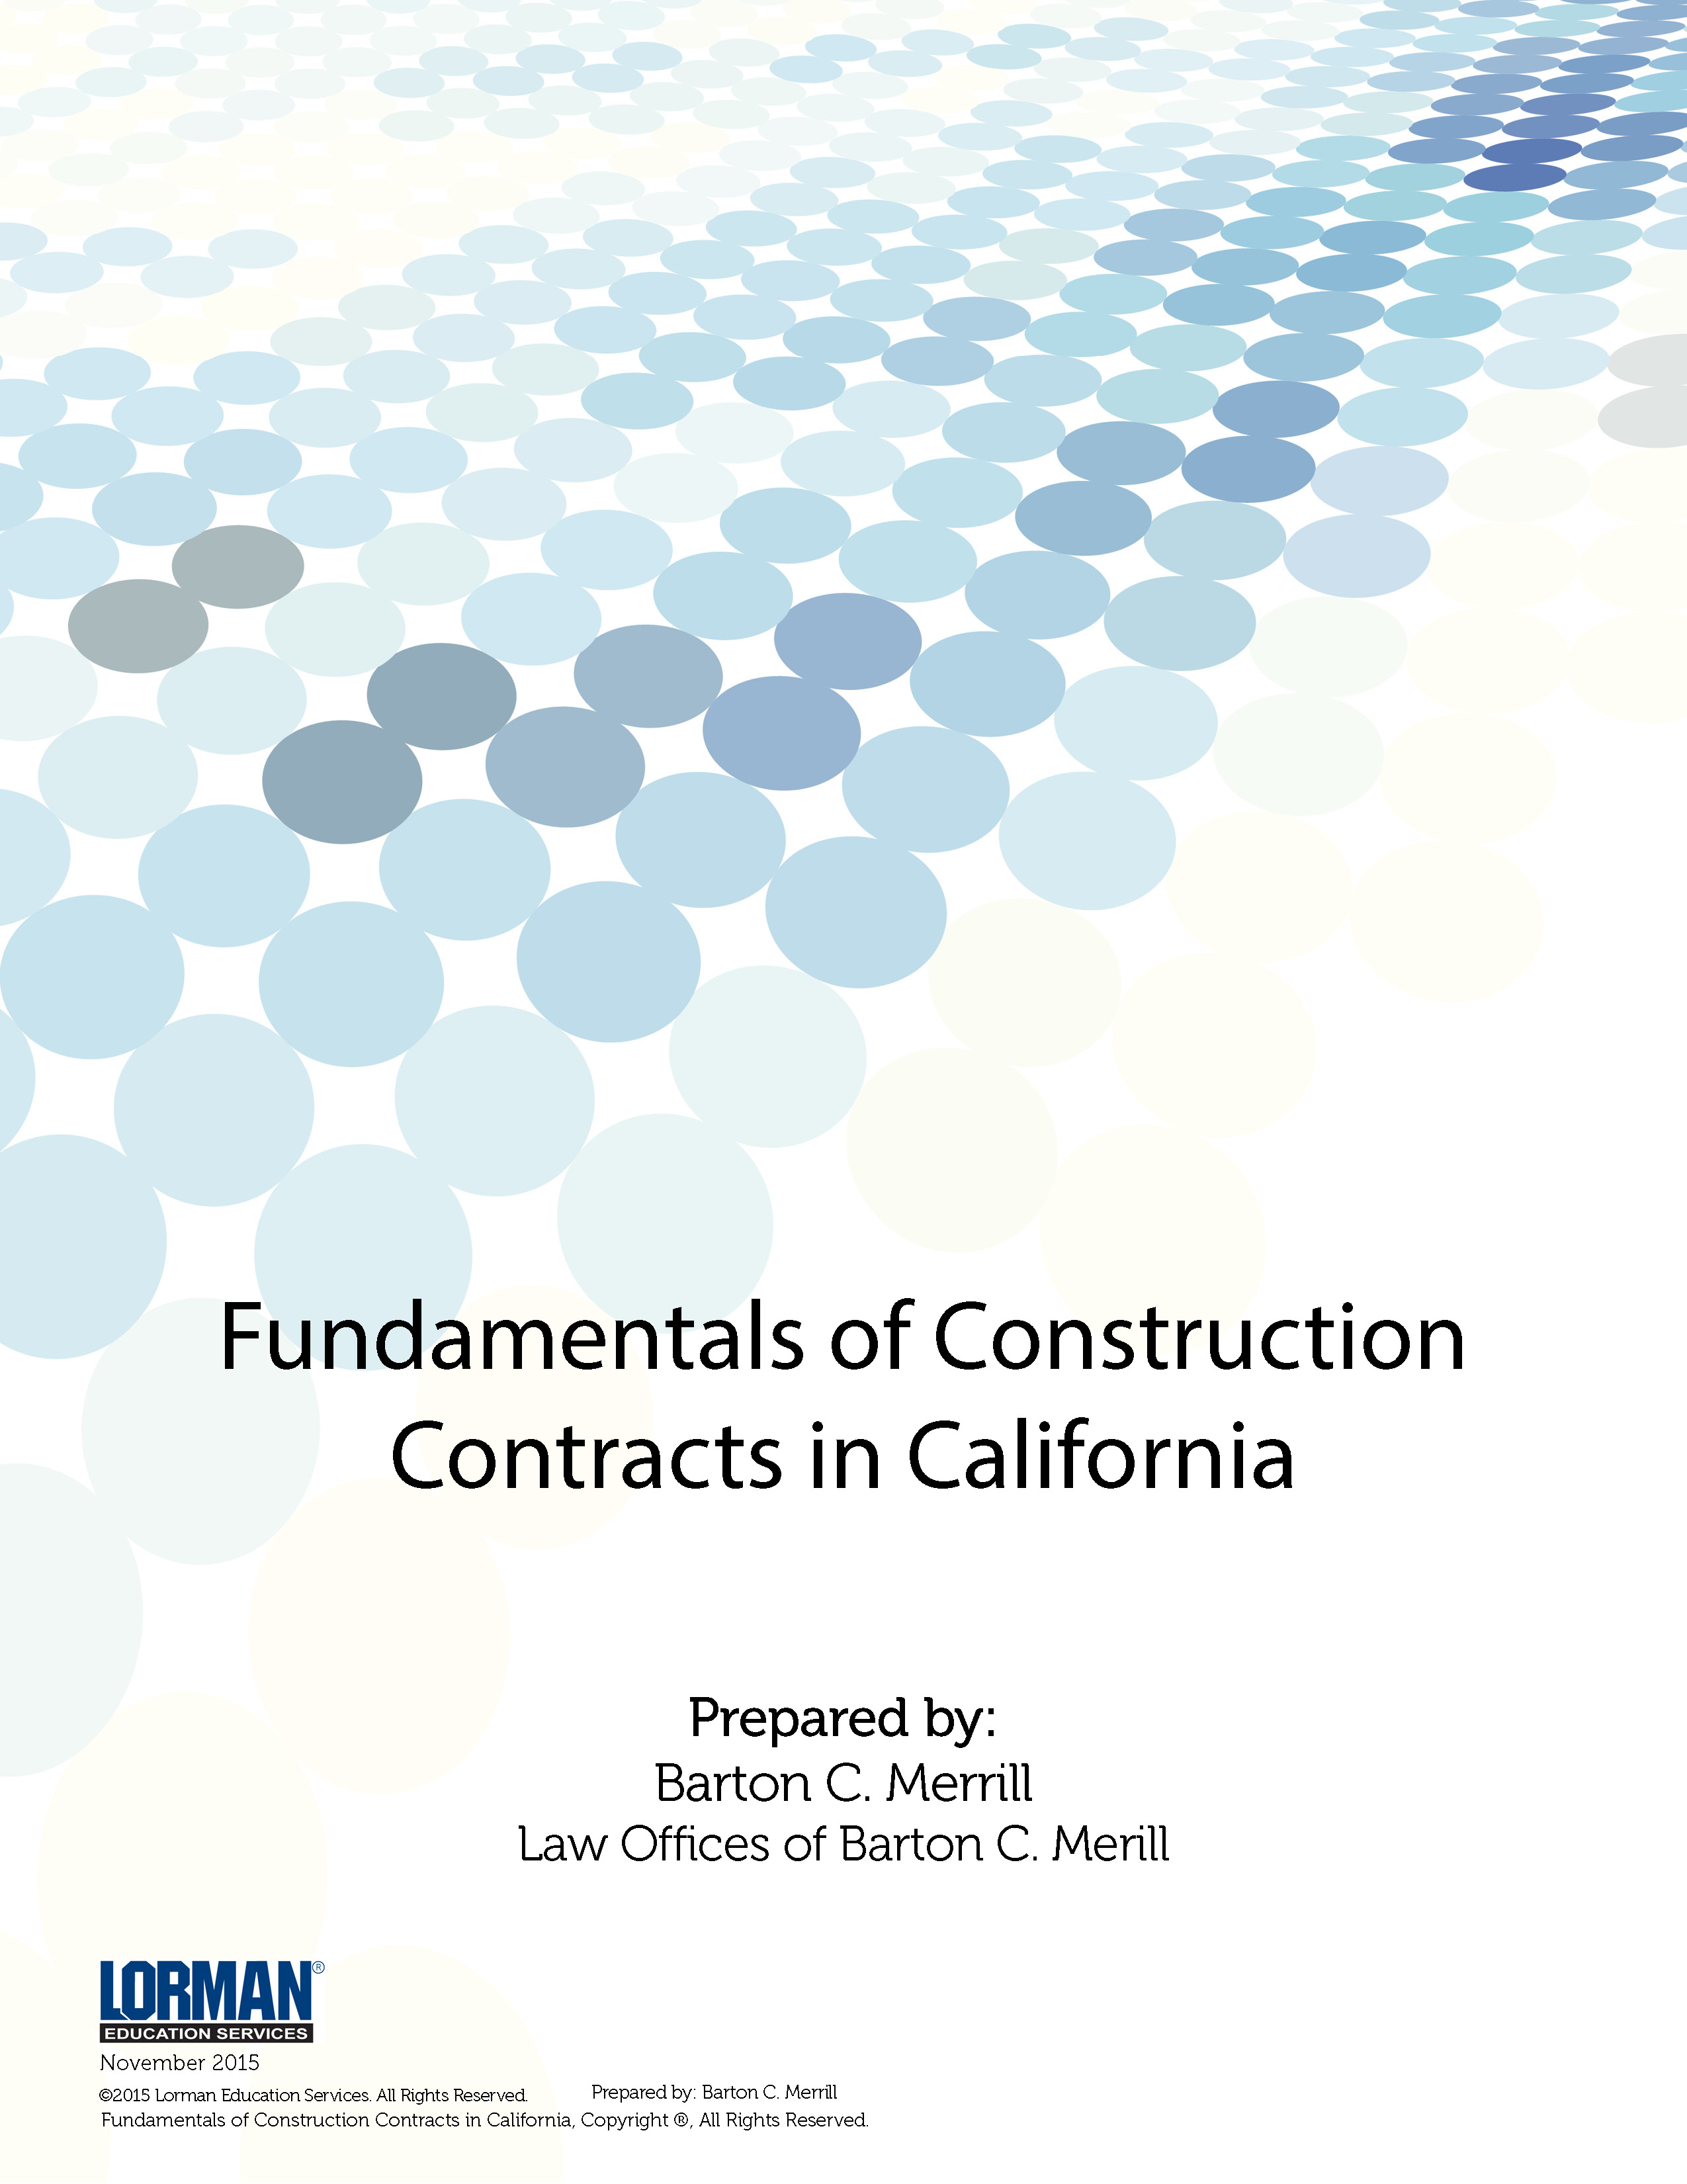 Fundamentals of Construction Contracts in California